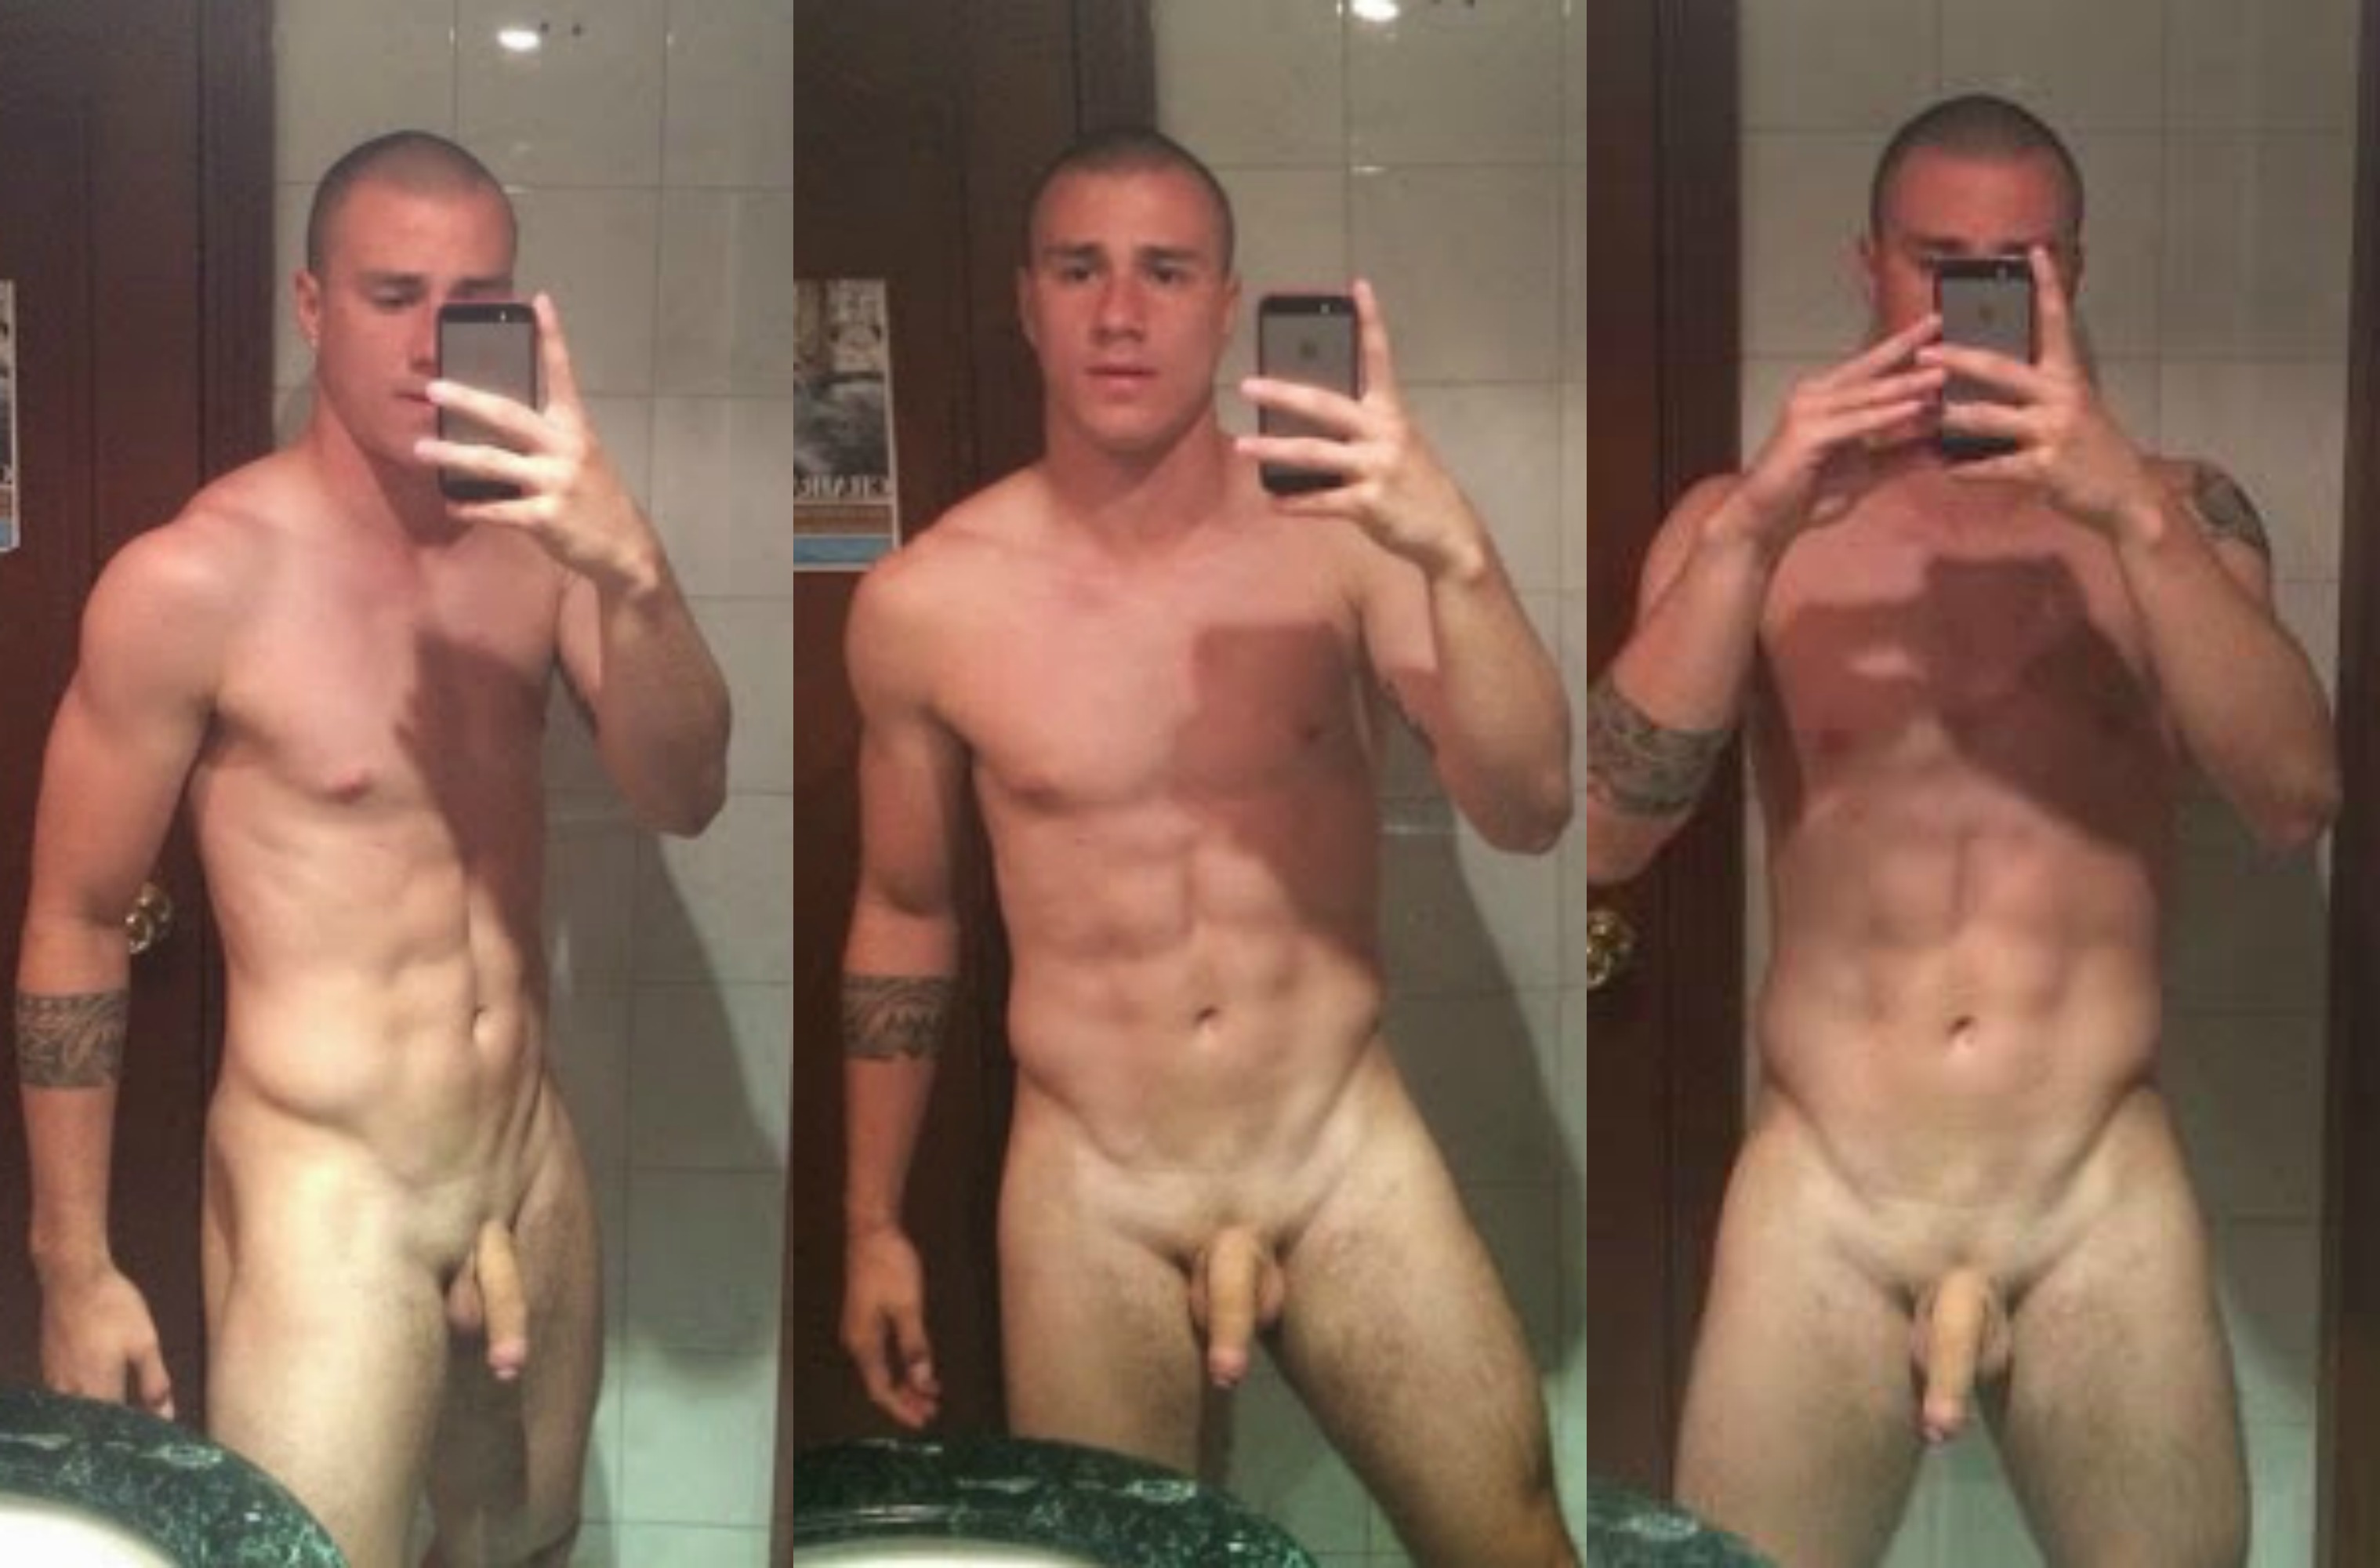 Man Candy Colombian Footballer Andres Correa Gets His Kit Off In Nude Selfies Cocktails